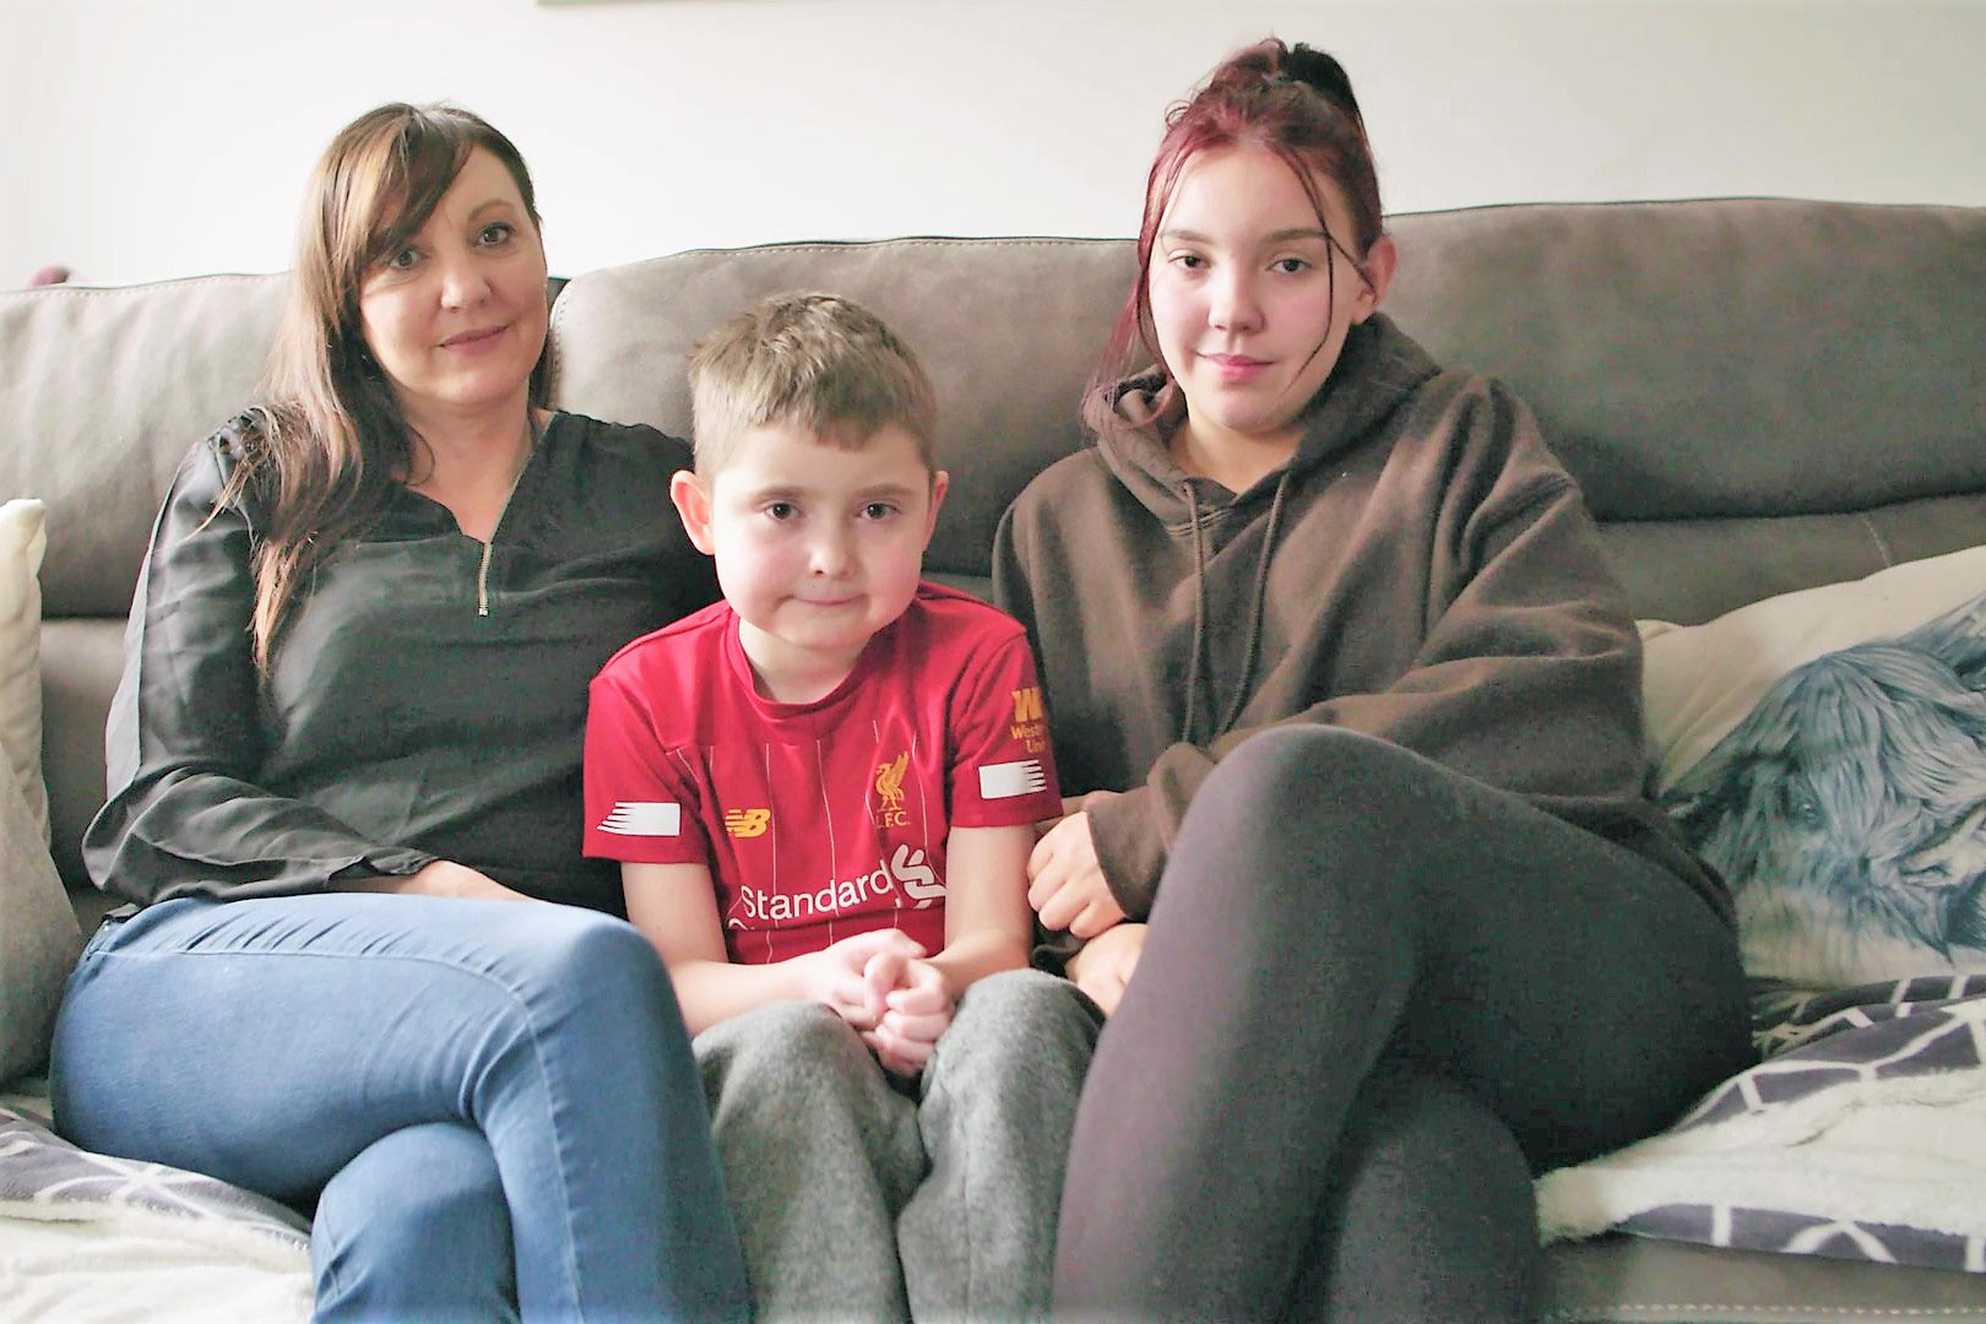 Wish child, Archie sitting on the sofa in his Liverpool shirt, with his mum and sister.